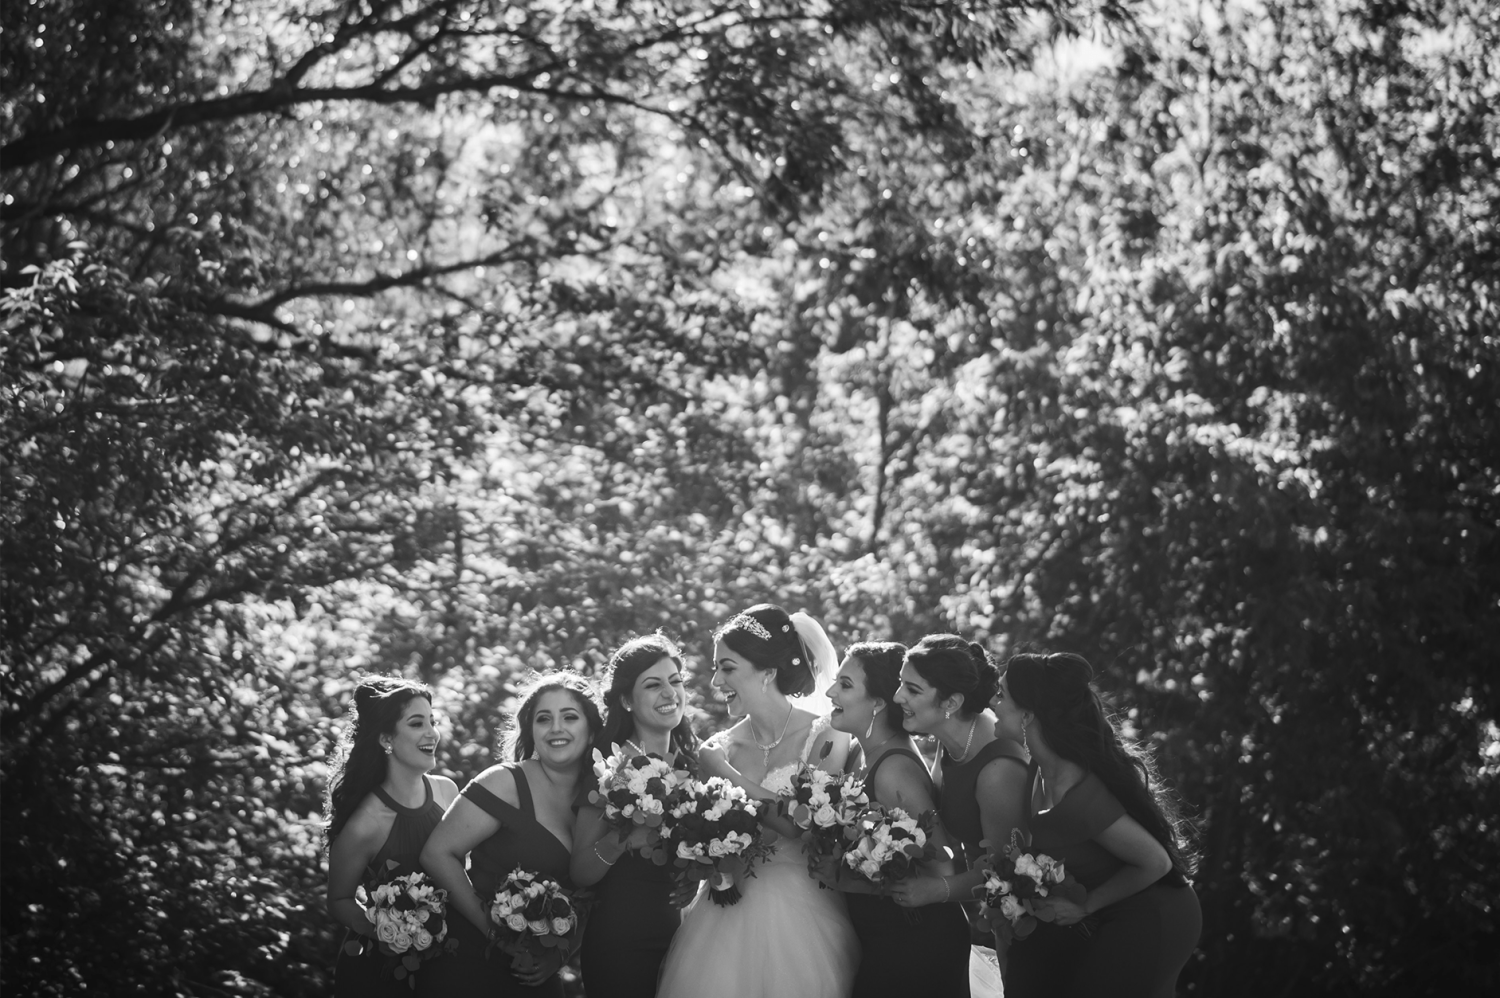 A bride and their bridesmaids grouped together outside in the Paradise Banquet Halls Garden venues.